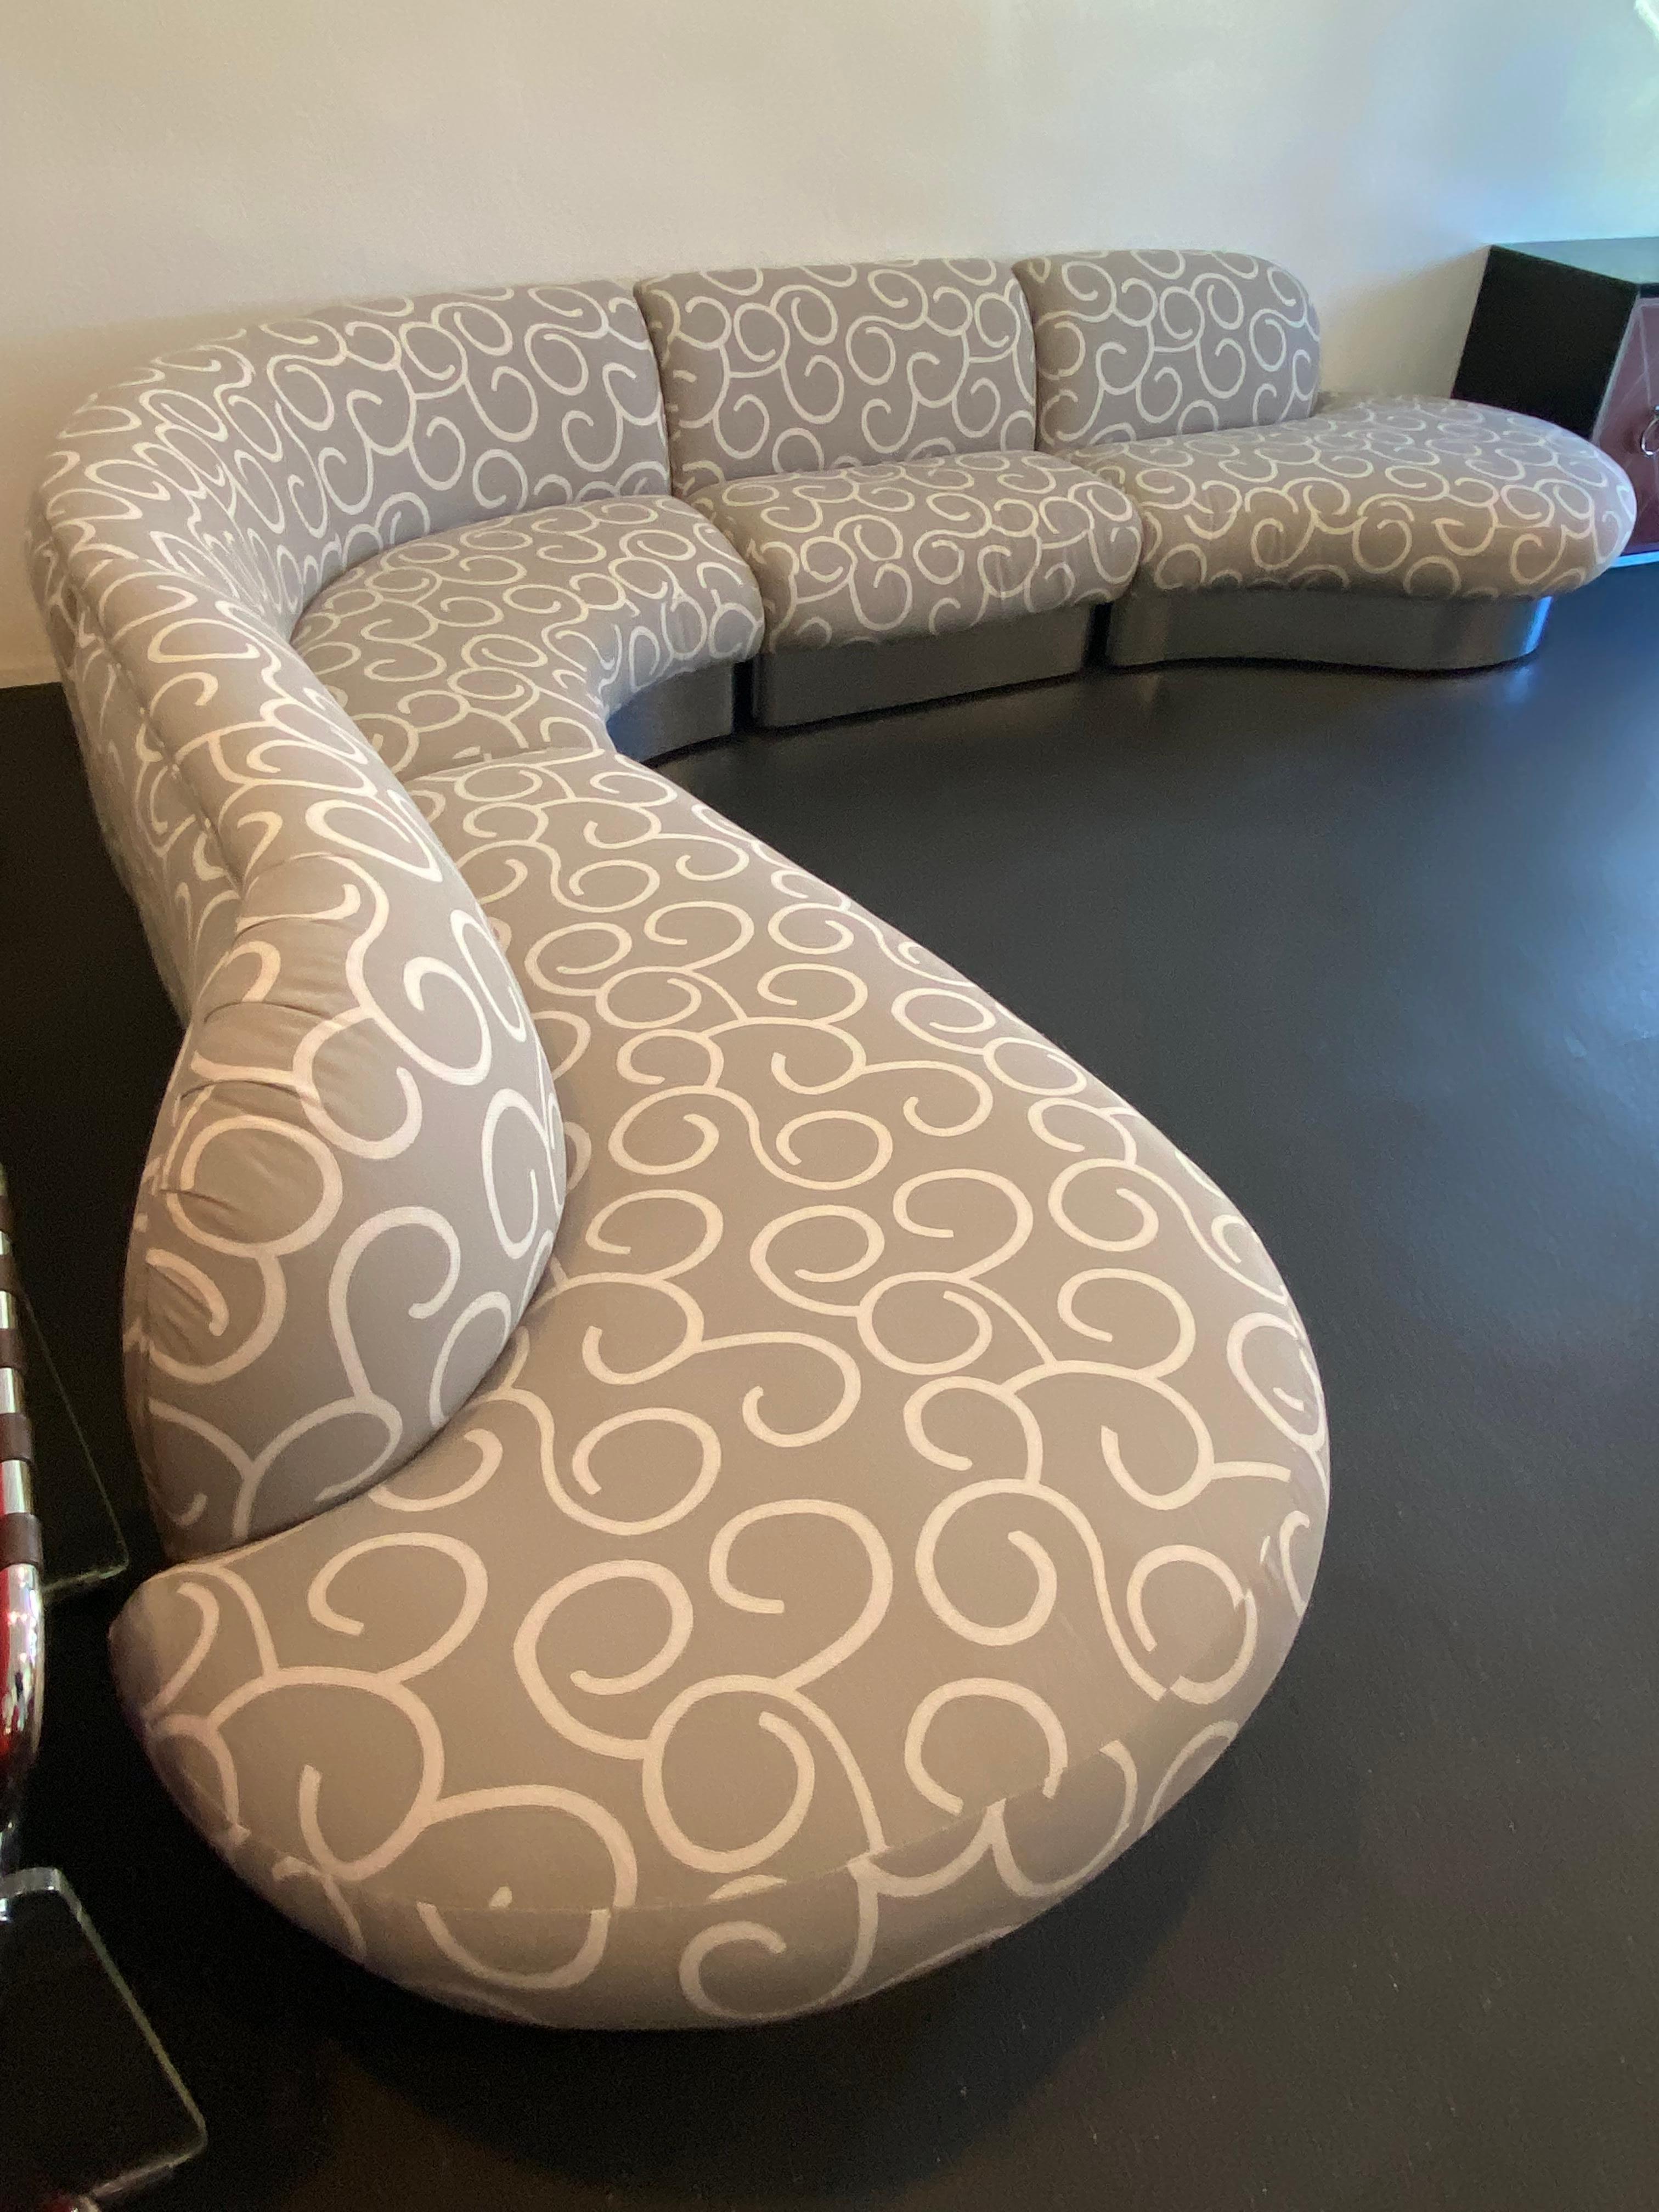 Rare Milo Baughman for Thayer Coggin Serpentine Sectional Sofa In Good Condition For Sale In West Palm Beach, FL